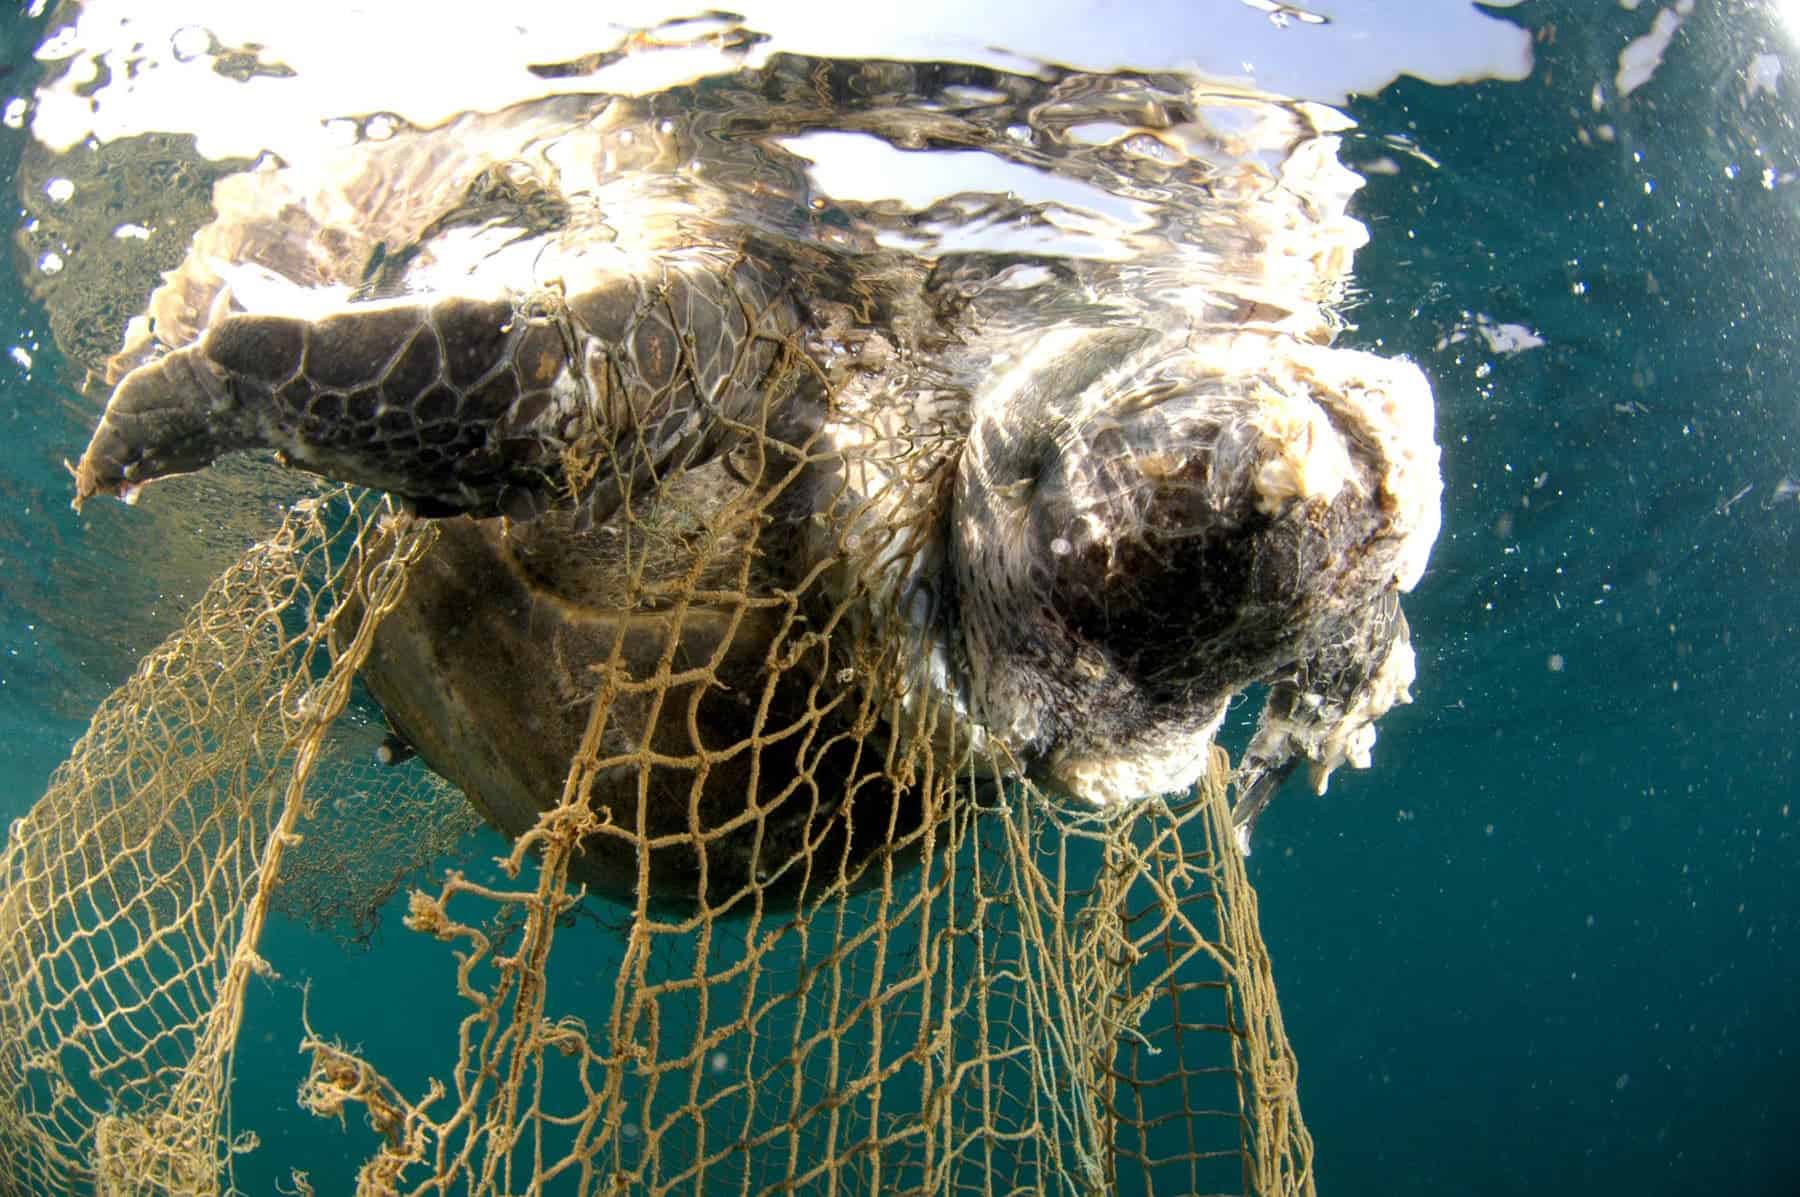 This unfortunate turtle was trapped in fishing nets and drowned. Image credits: Salvatore Barbera.